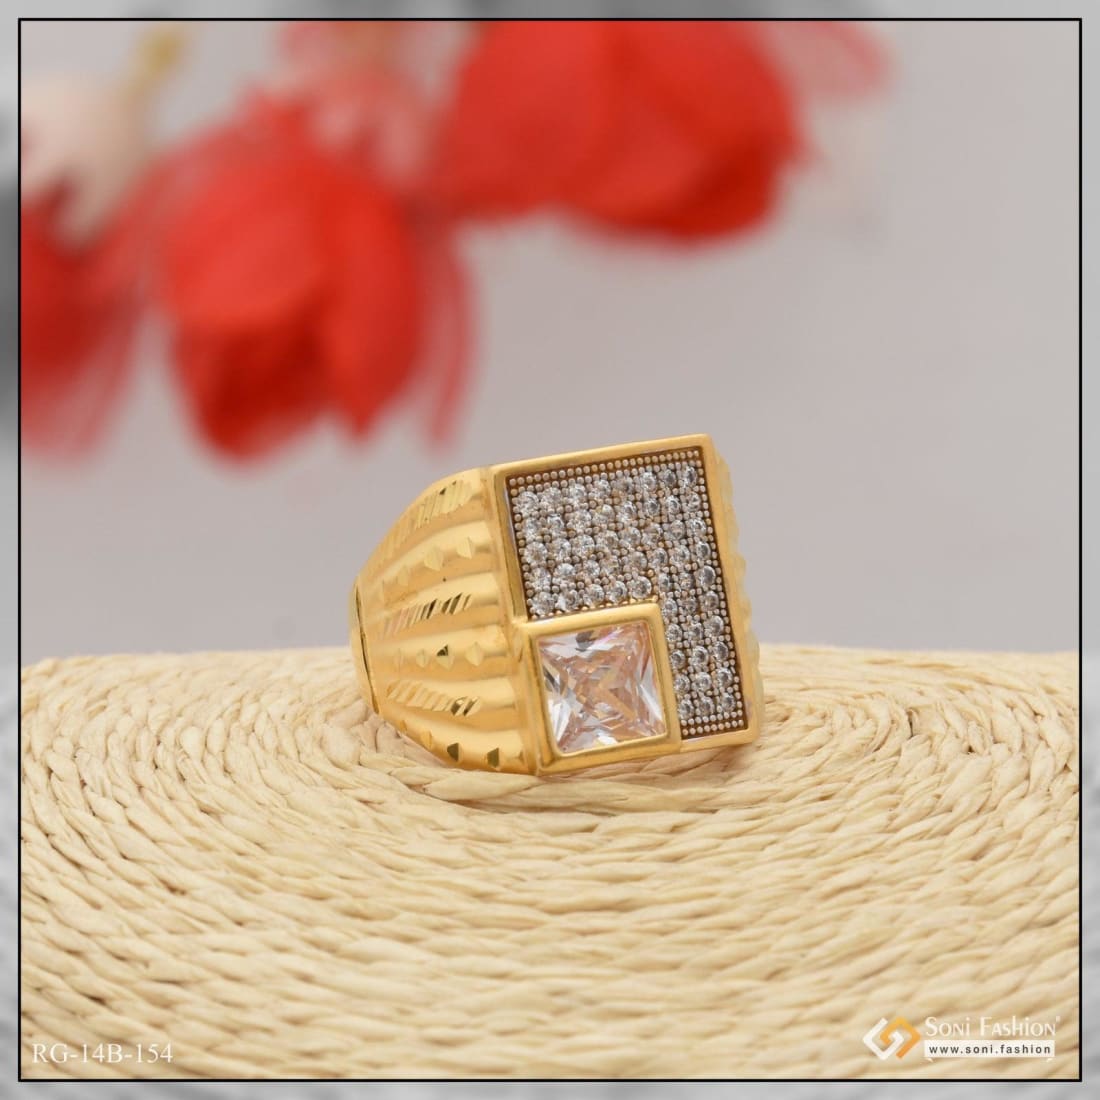 1 gram gold forming white stone with diamond funky design ring for ...